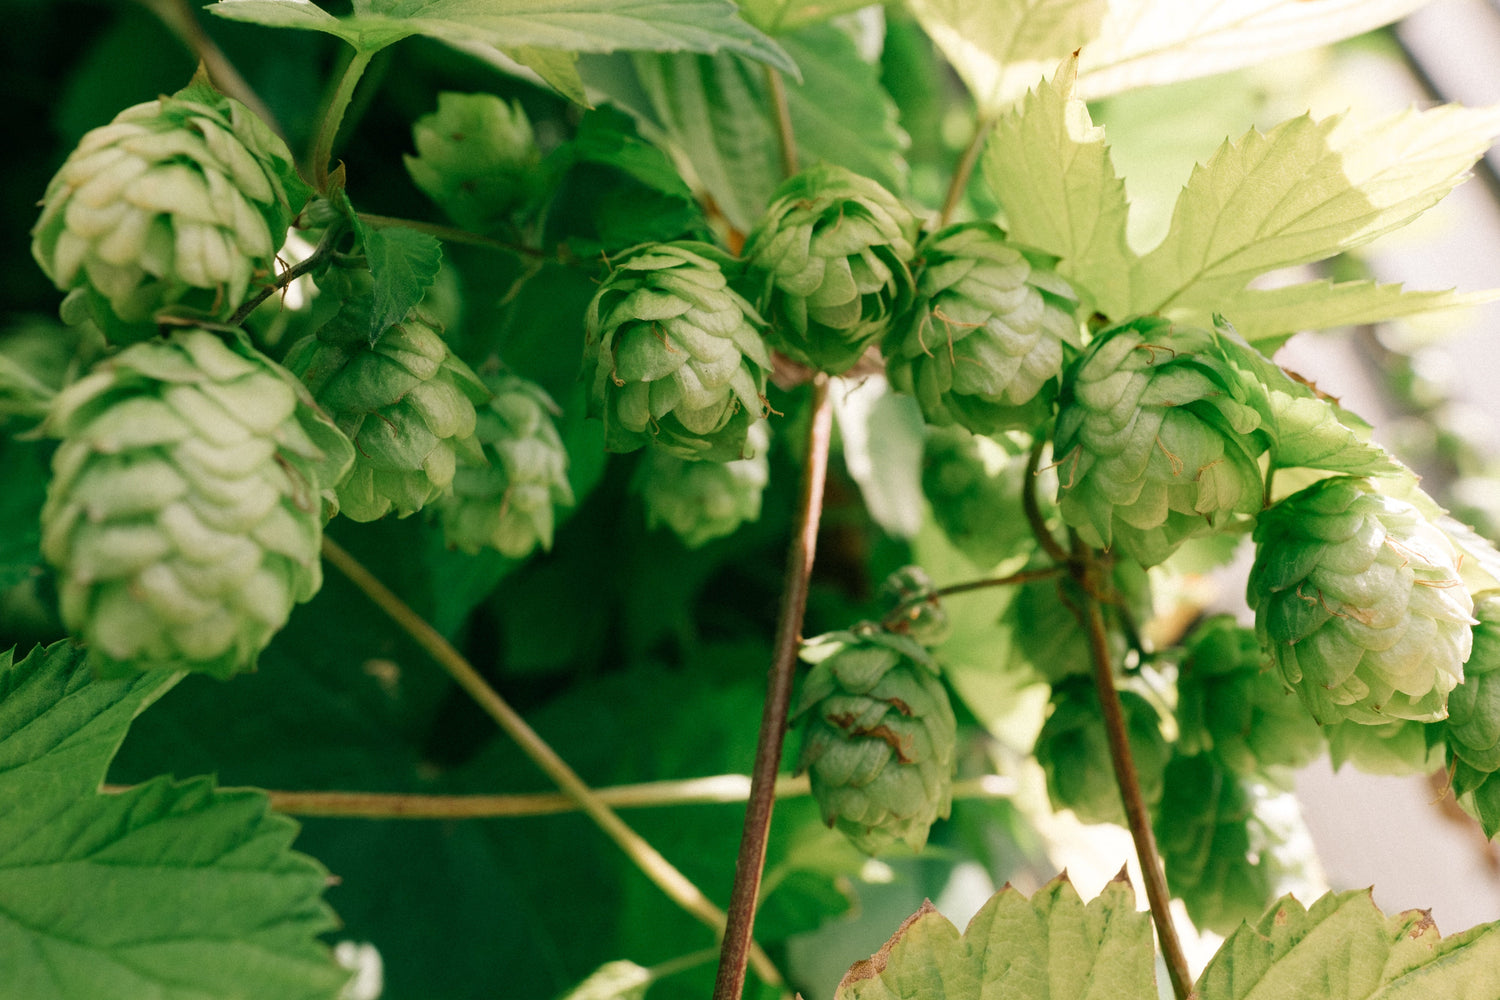 Partially shaded hops vine in bloom